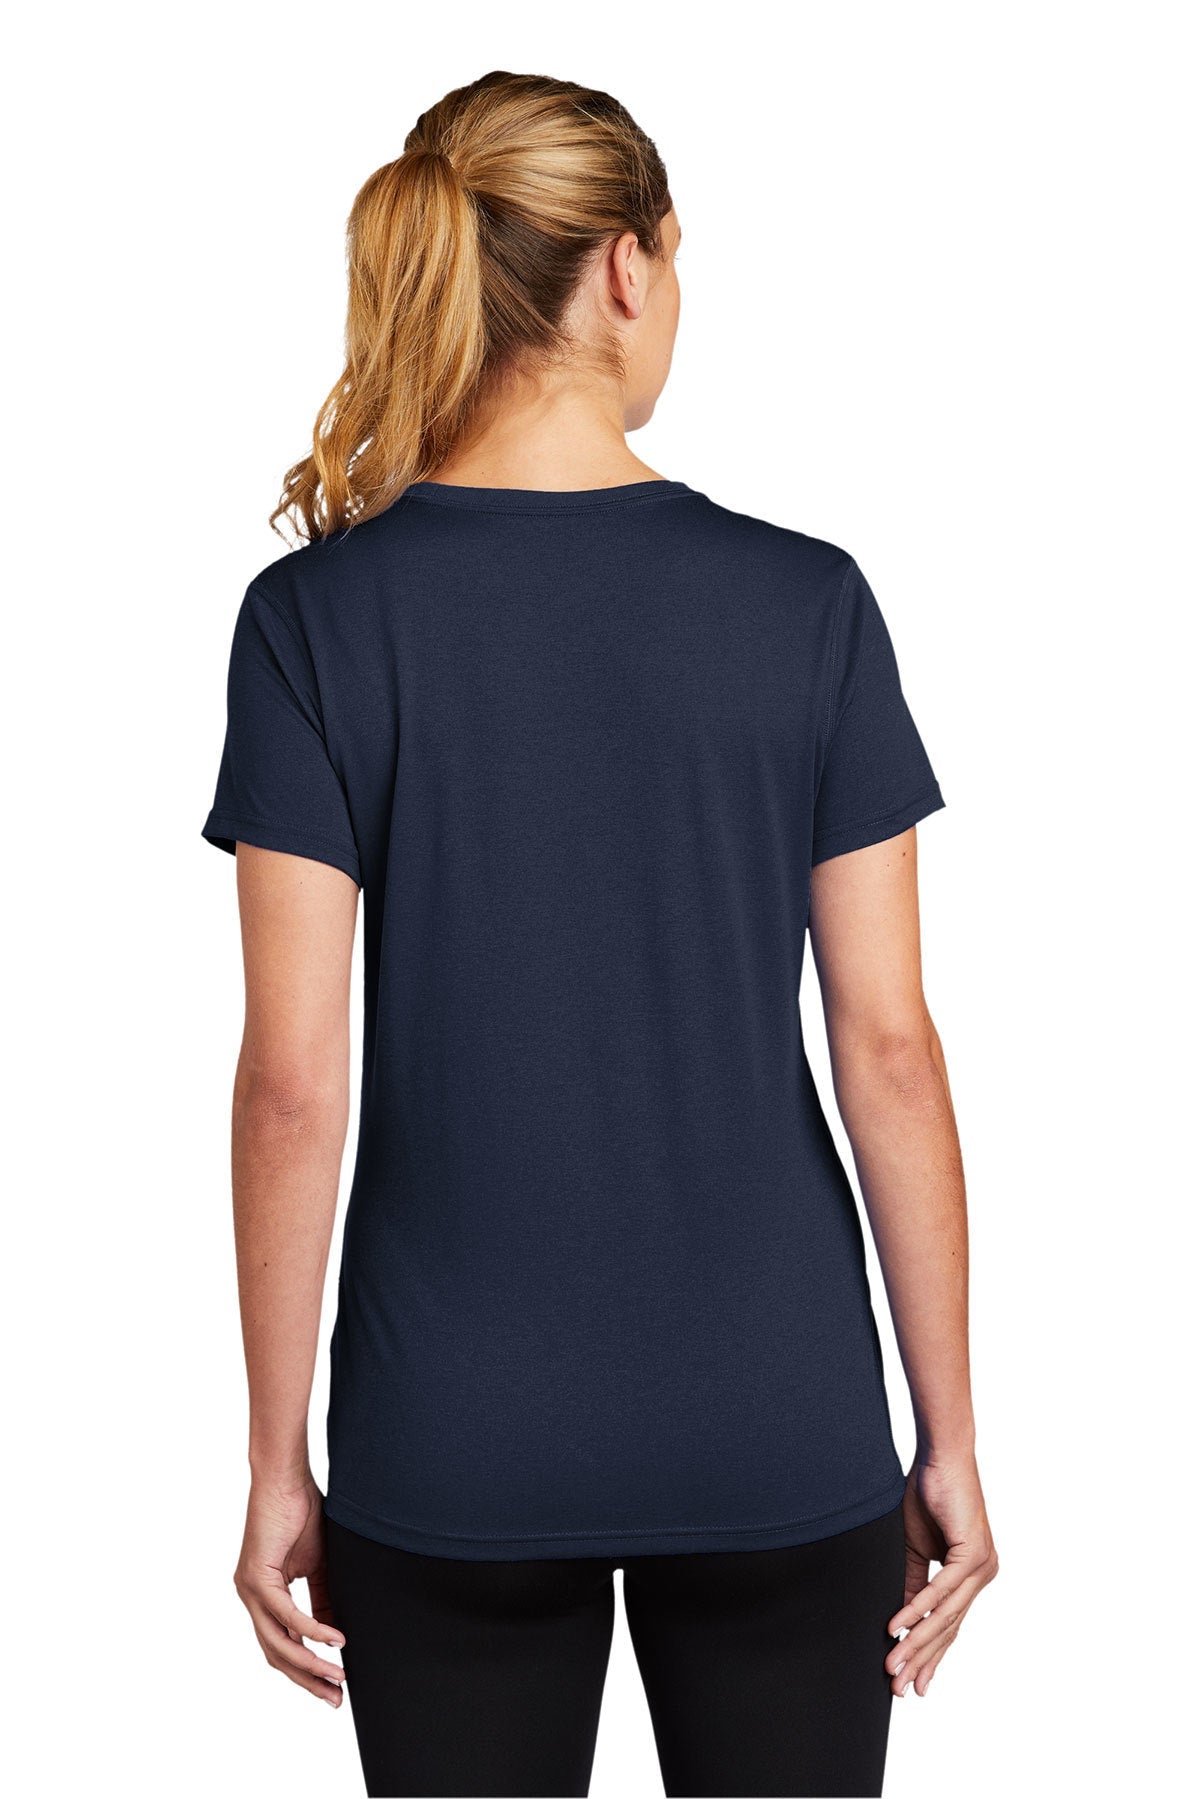 Nike Ladies Legend Customized T-Shirts, College Navy